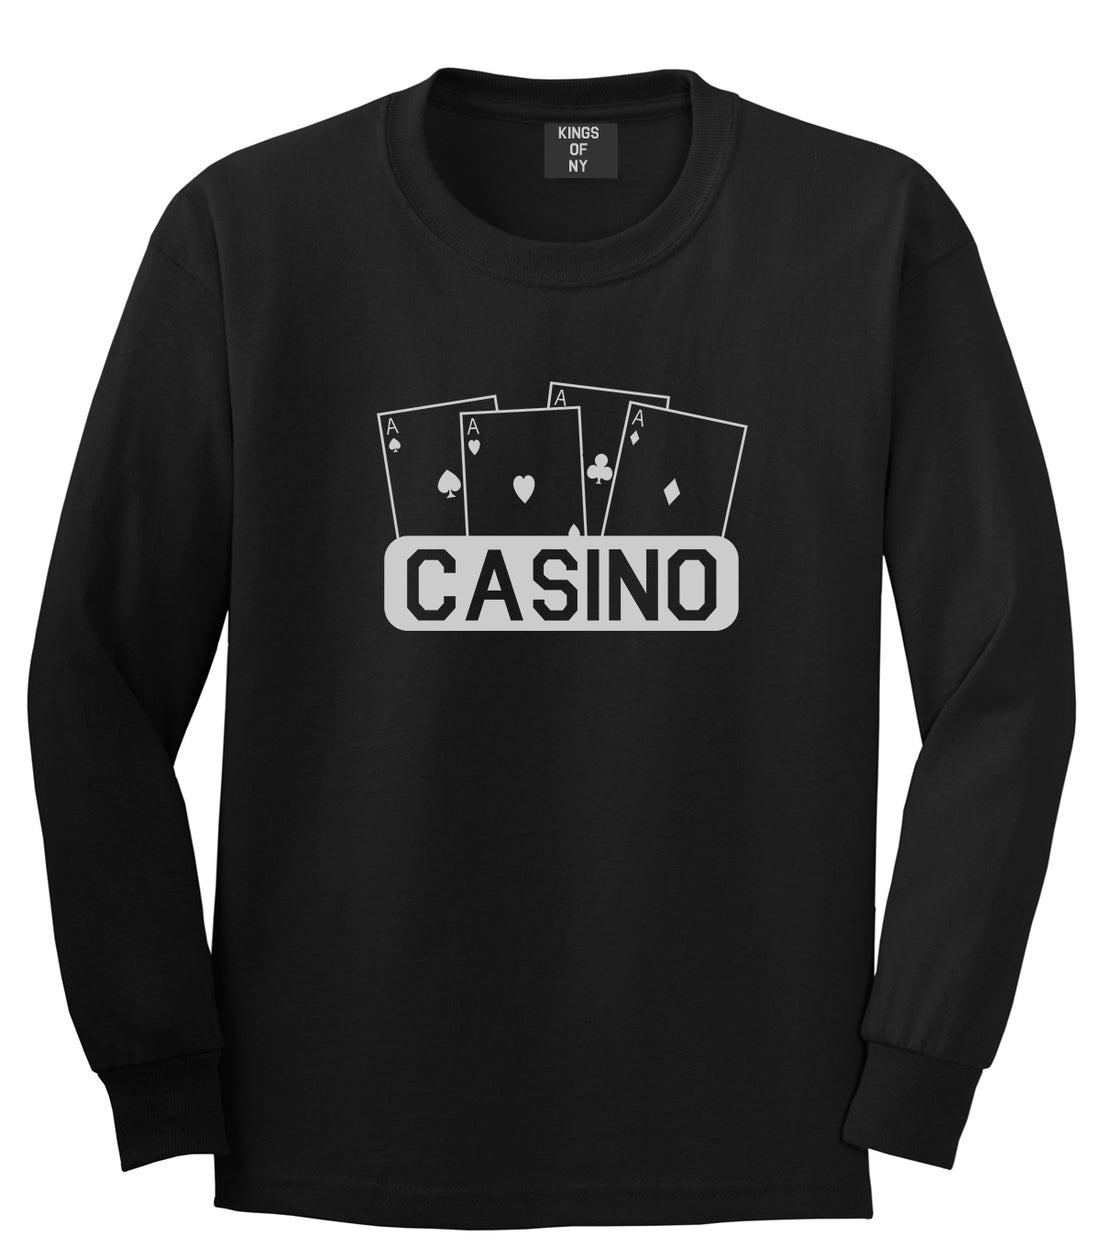 Casino Ace Cards Black Long Sleeve T-Shirt by Kings Of NY